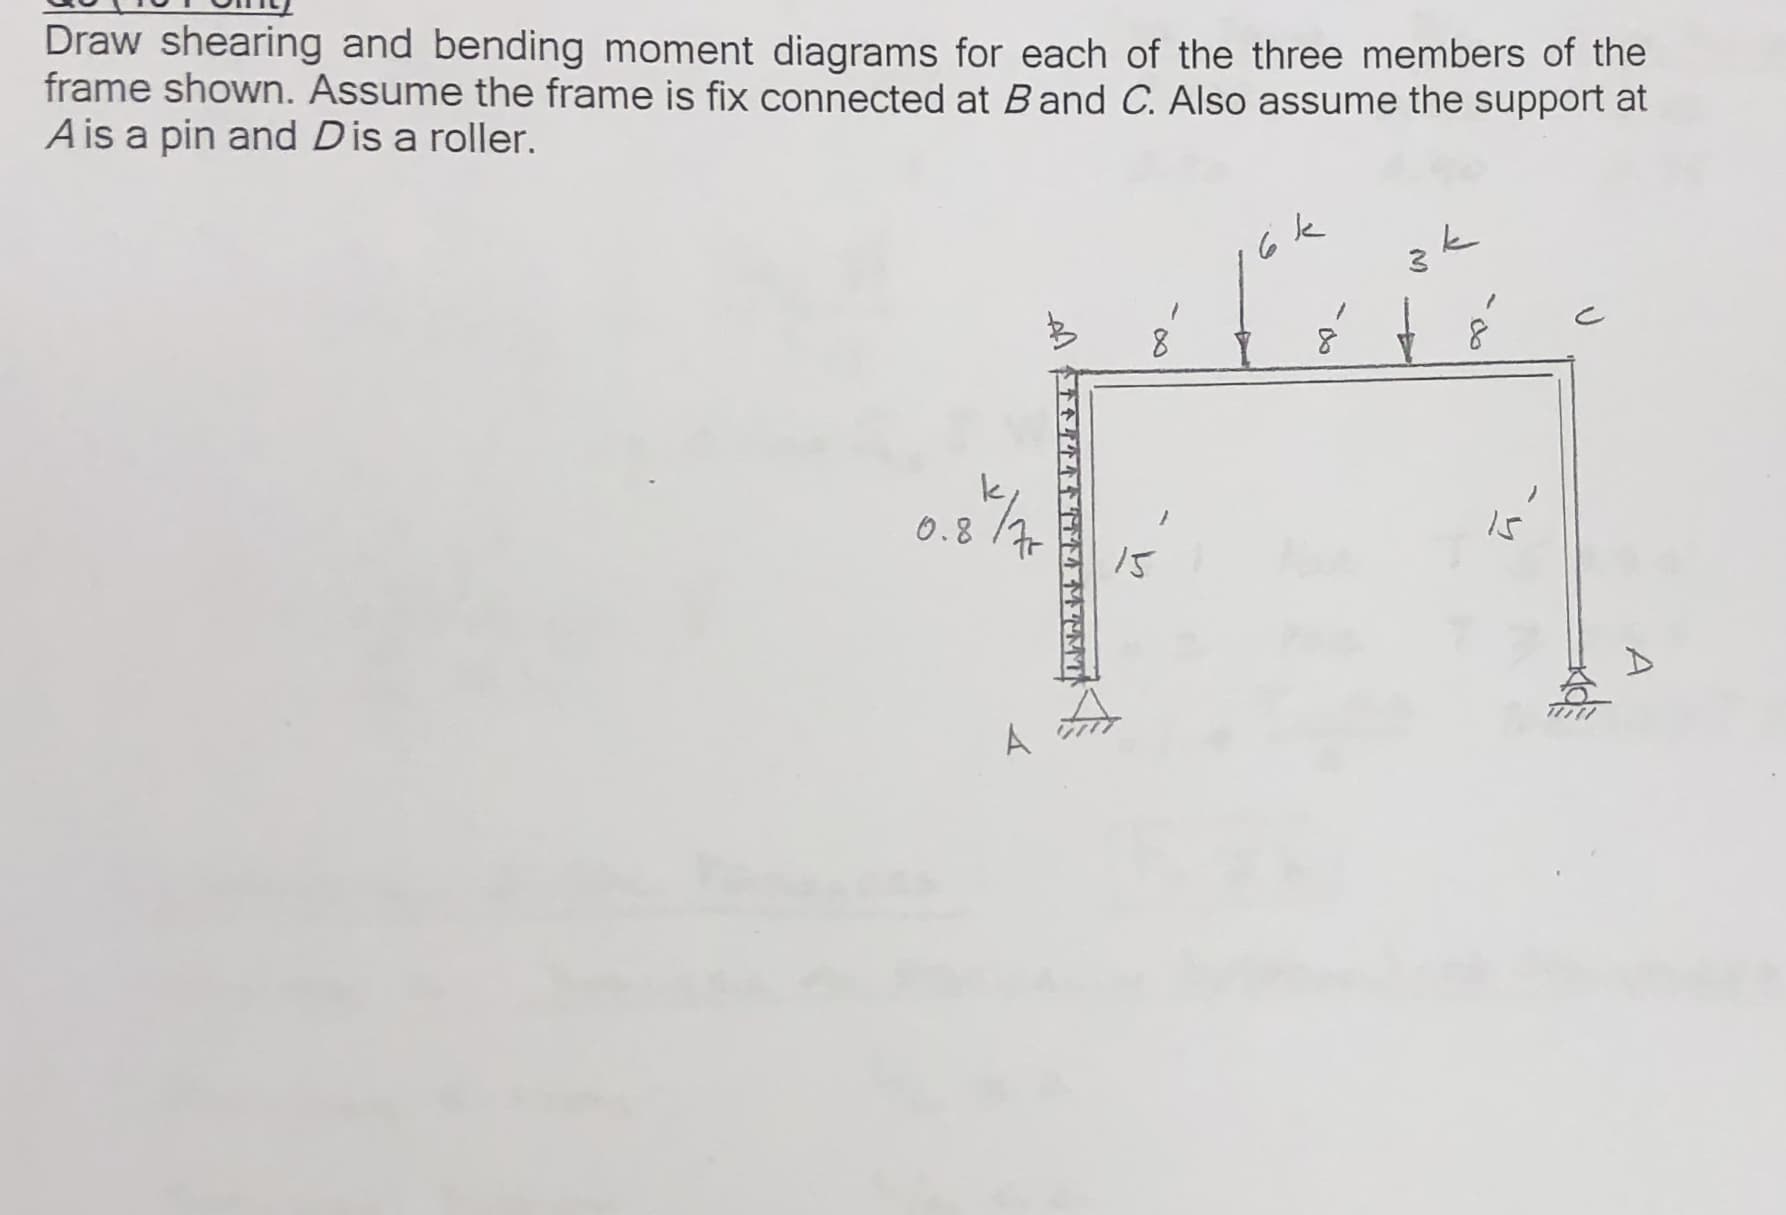 Draw shearing and bending moment diagrams for each of the three members of the
frame shown. Assume the frame is fix connected at Band C. Also assume the support at
A is a pin and Dis a roller.
k
Is
O.8
/S
A
